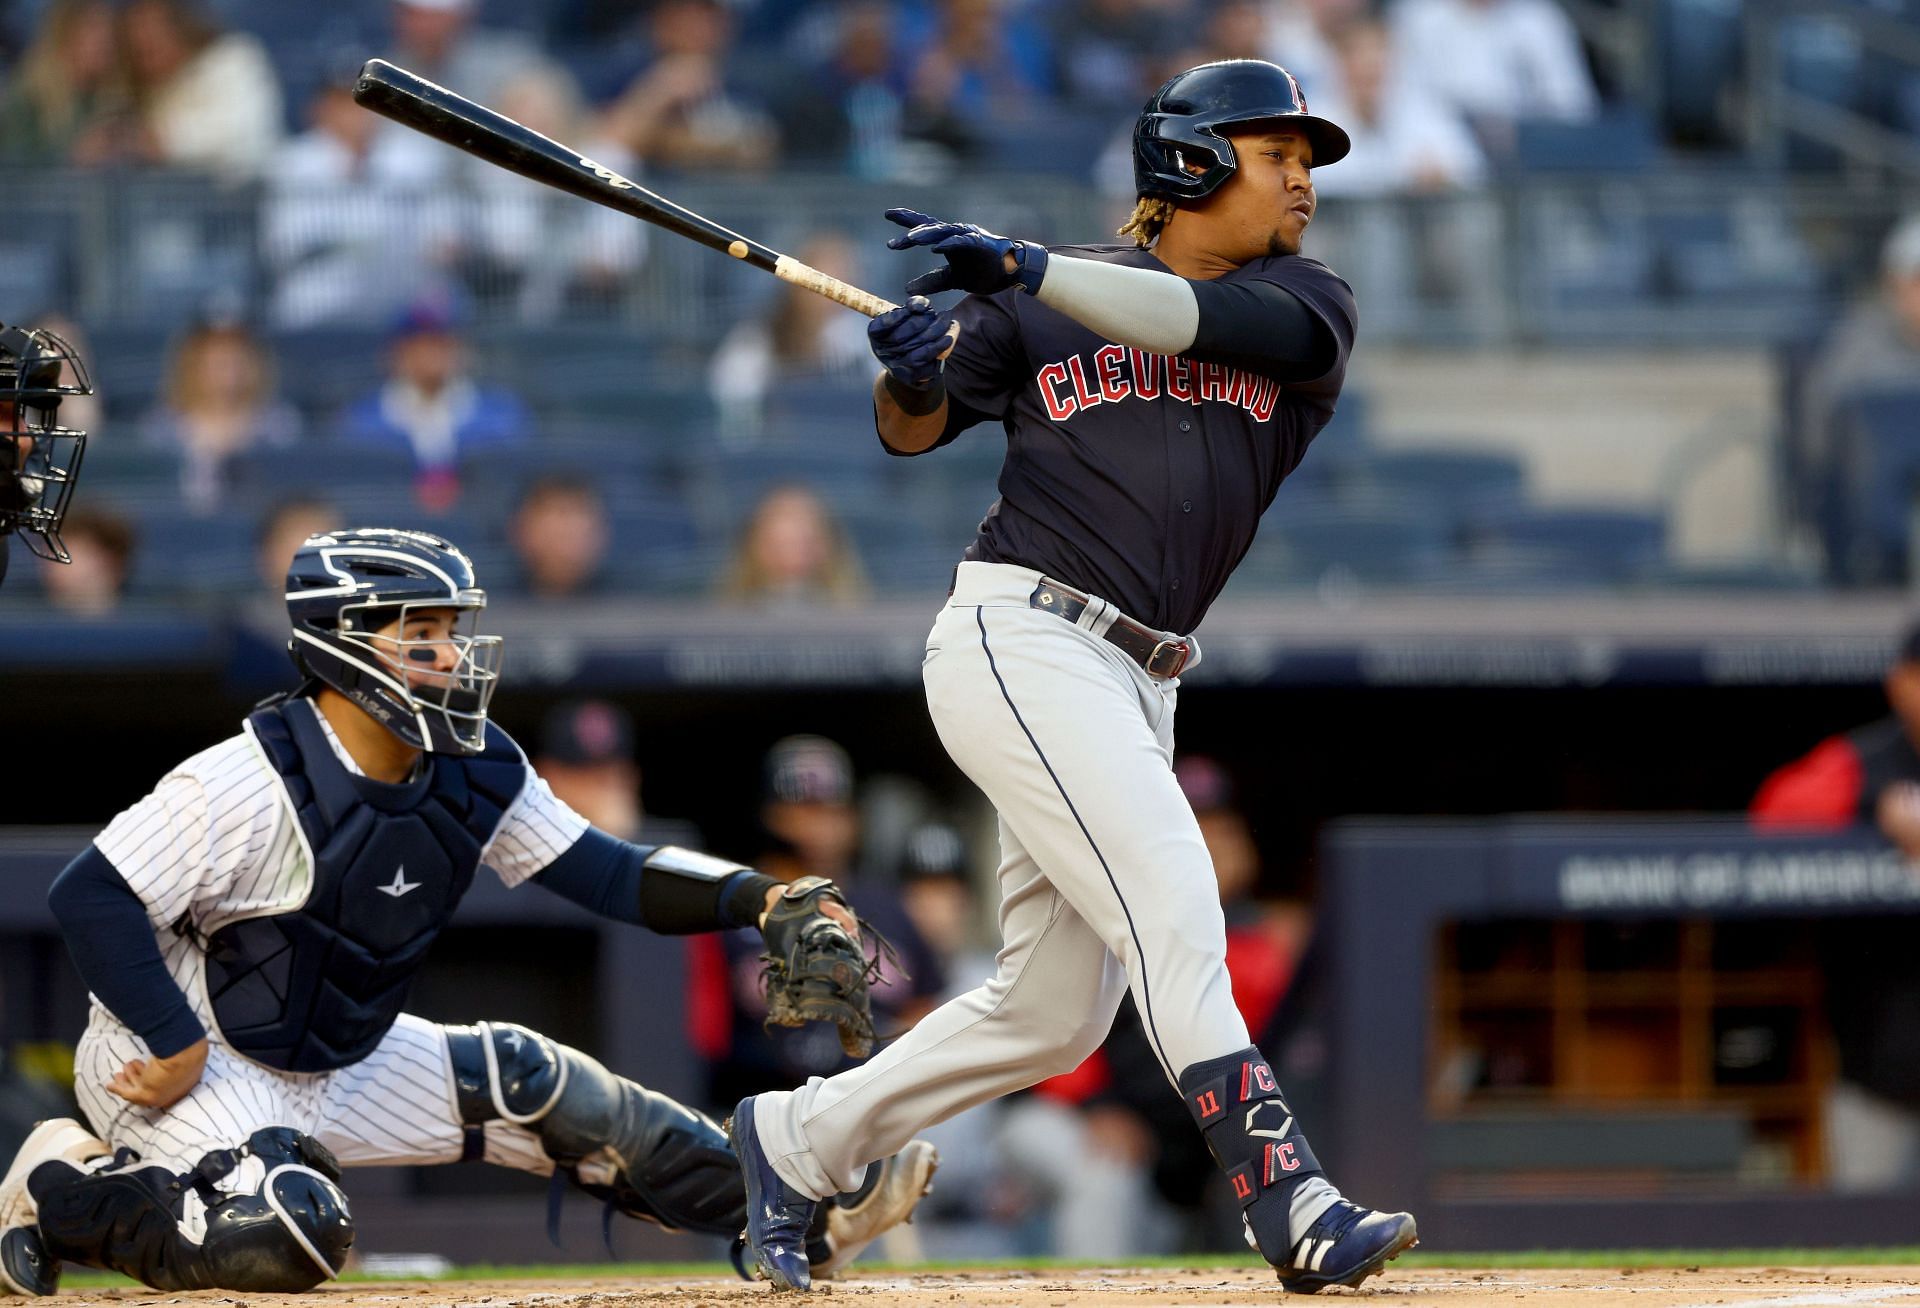 Cleveland Guardians signed Jose Ramirez to a contract extension that will keep the third baseman in Cleveland through the 2028 season.